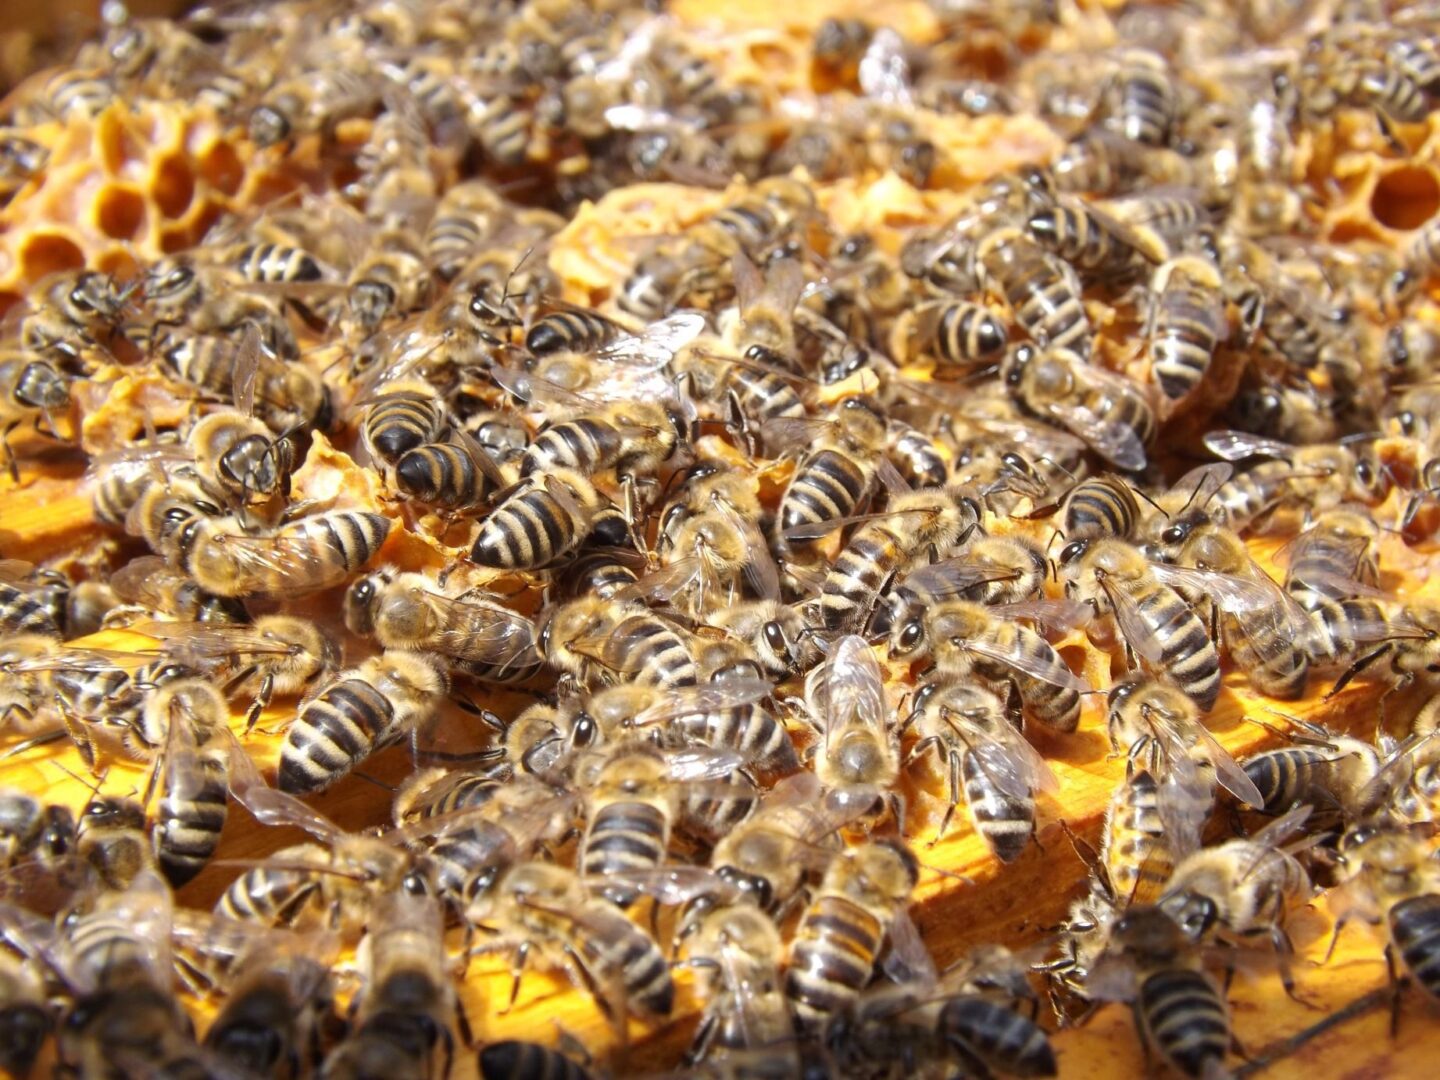 A close up of many bees on the ground